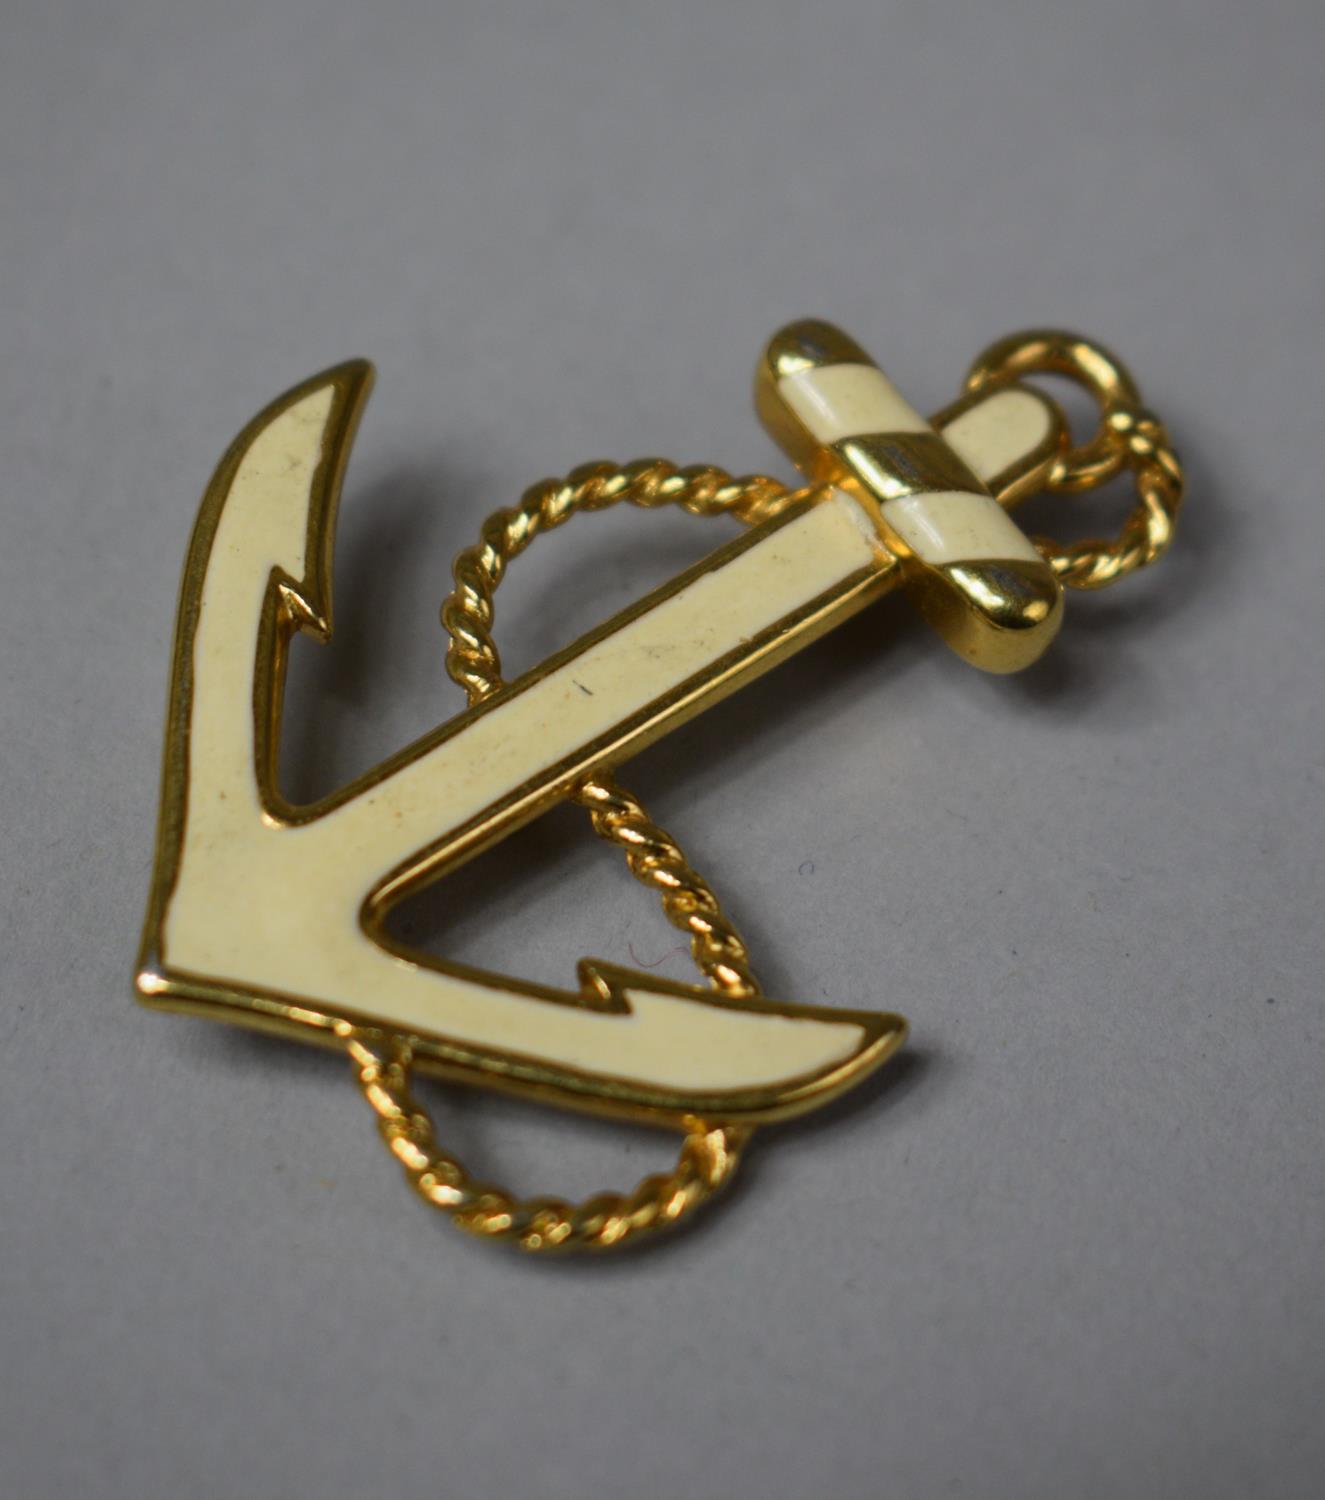 A Mid 20th Century Monet Gold Tone and Cream Enamelled 'Fouled Anchor' Brooch, (Fouling Wire